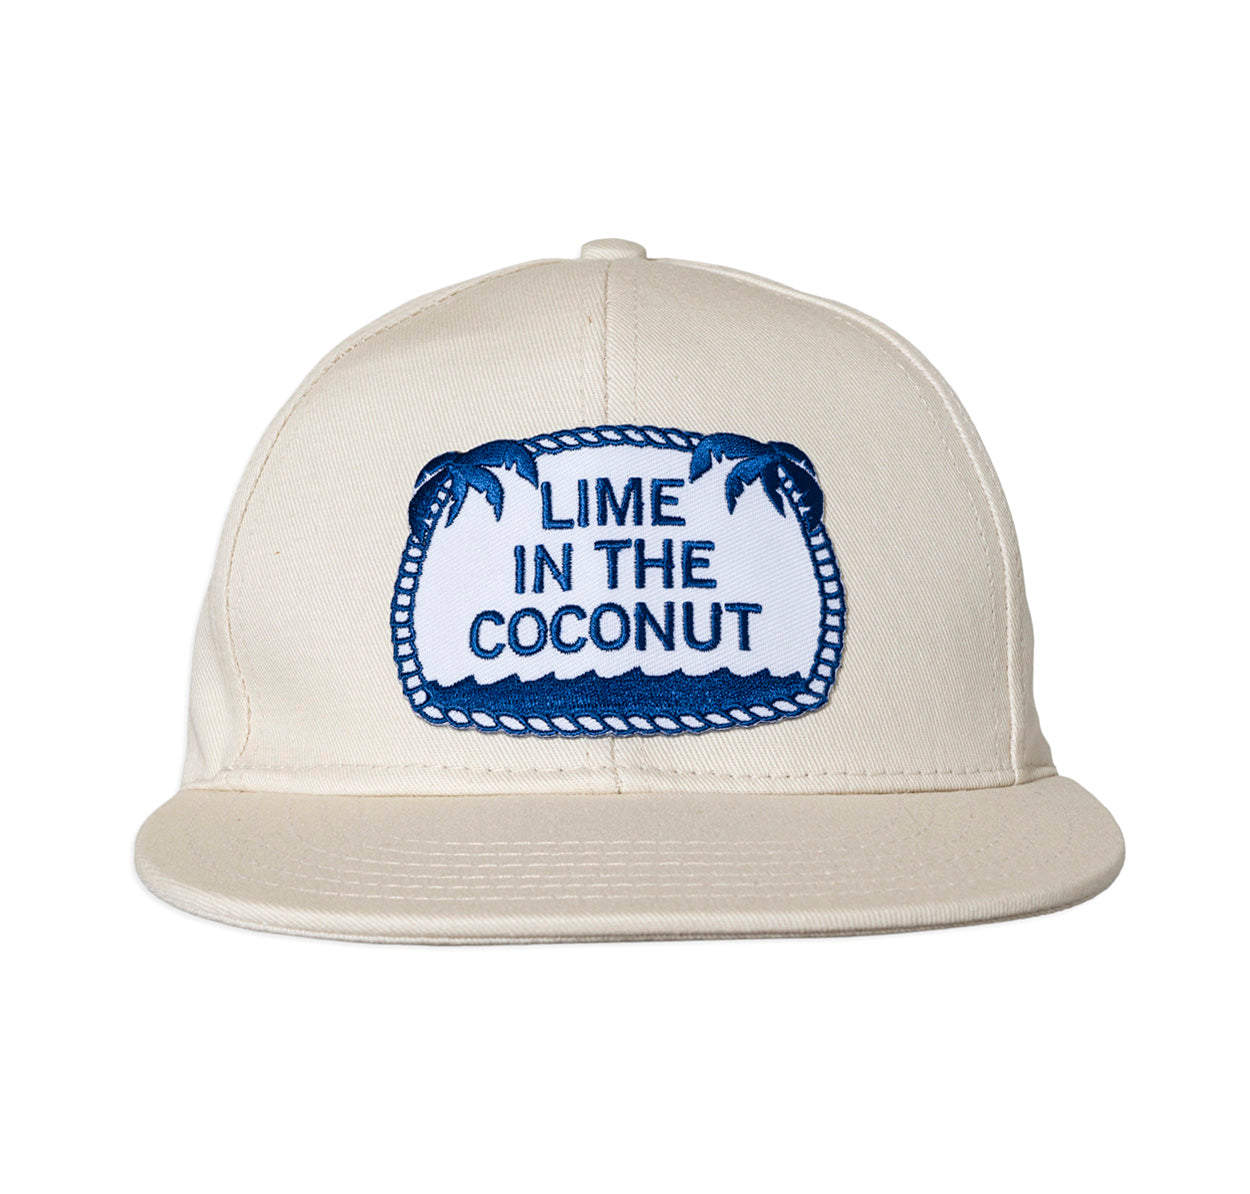 Lime in the Coconut ball cap